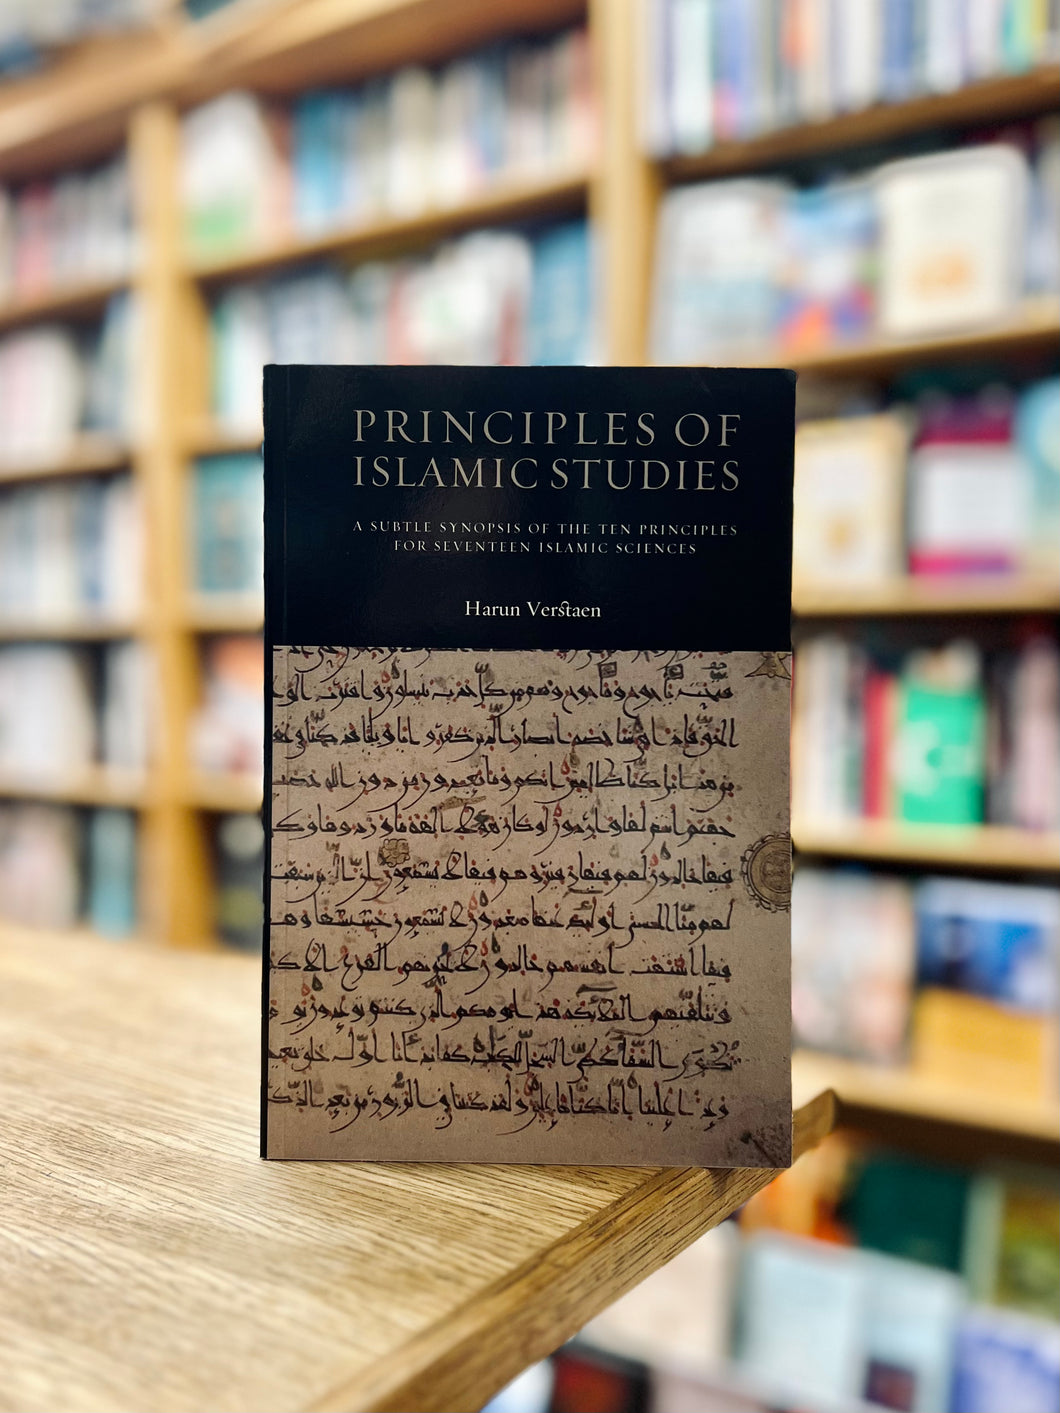 Principles of Islamic Studies: A Subtle Synopsis of the Ten Principles for Seventeen Islamic Sciences